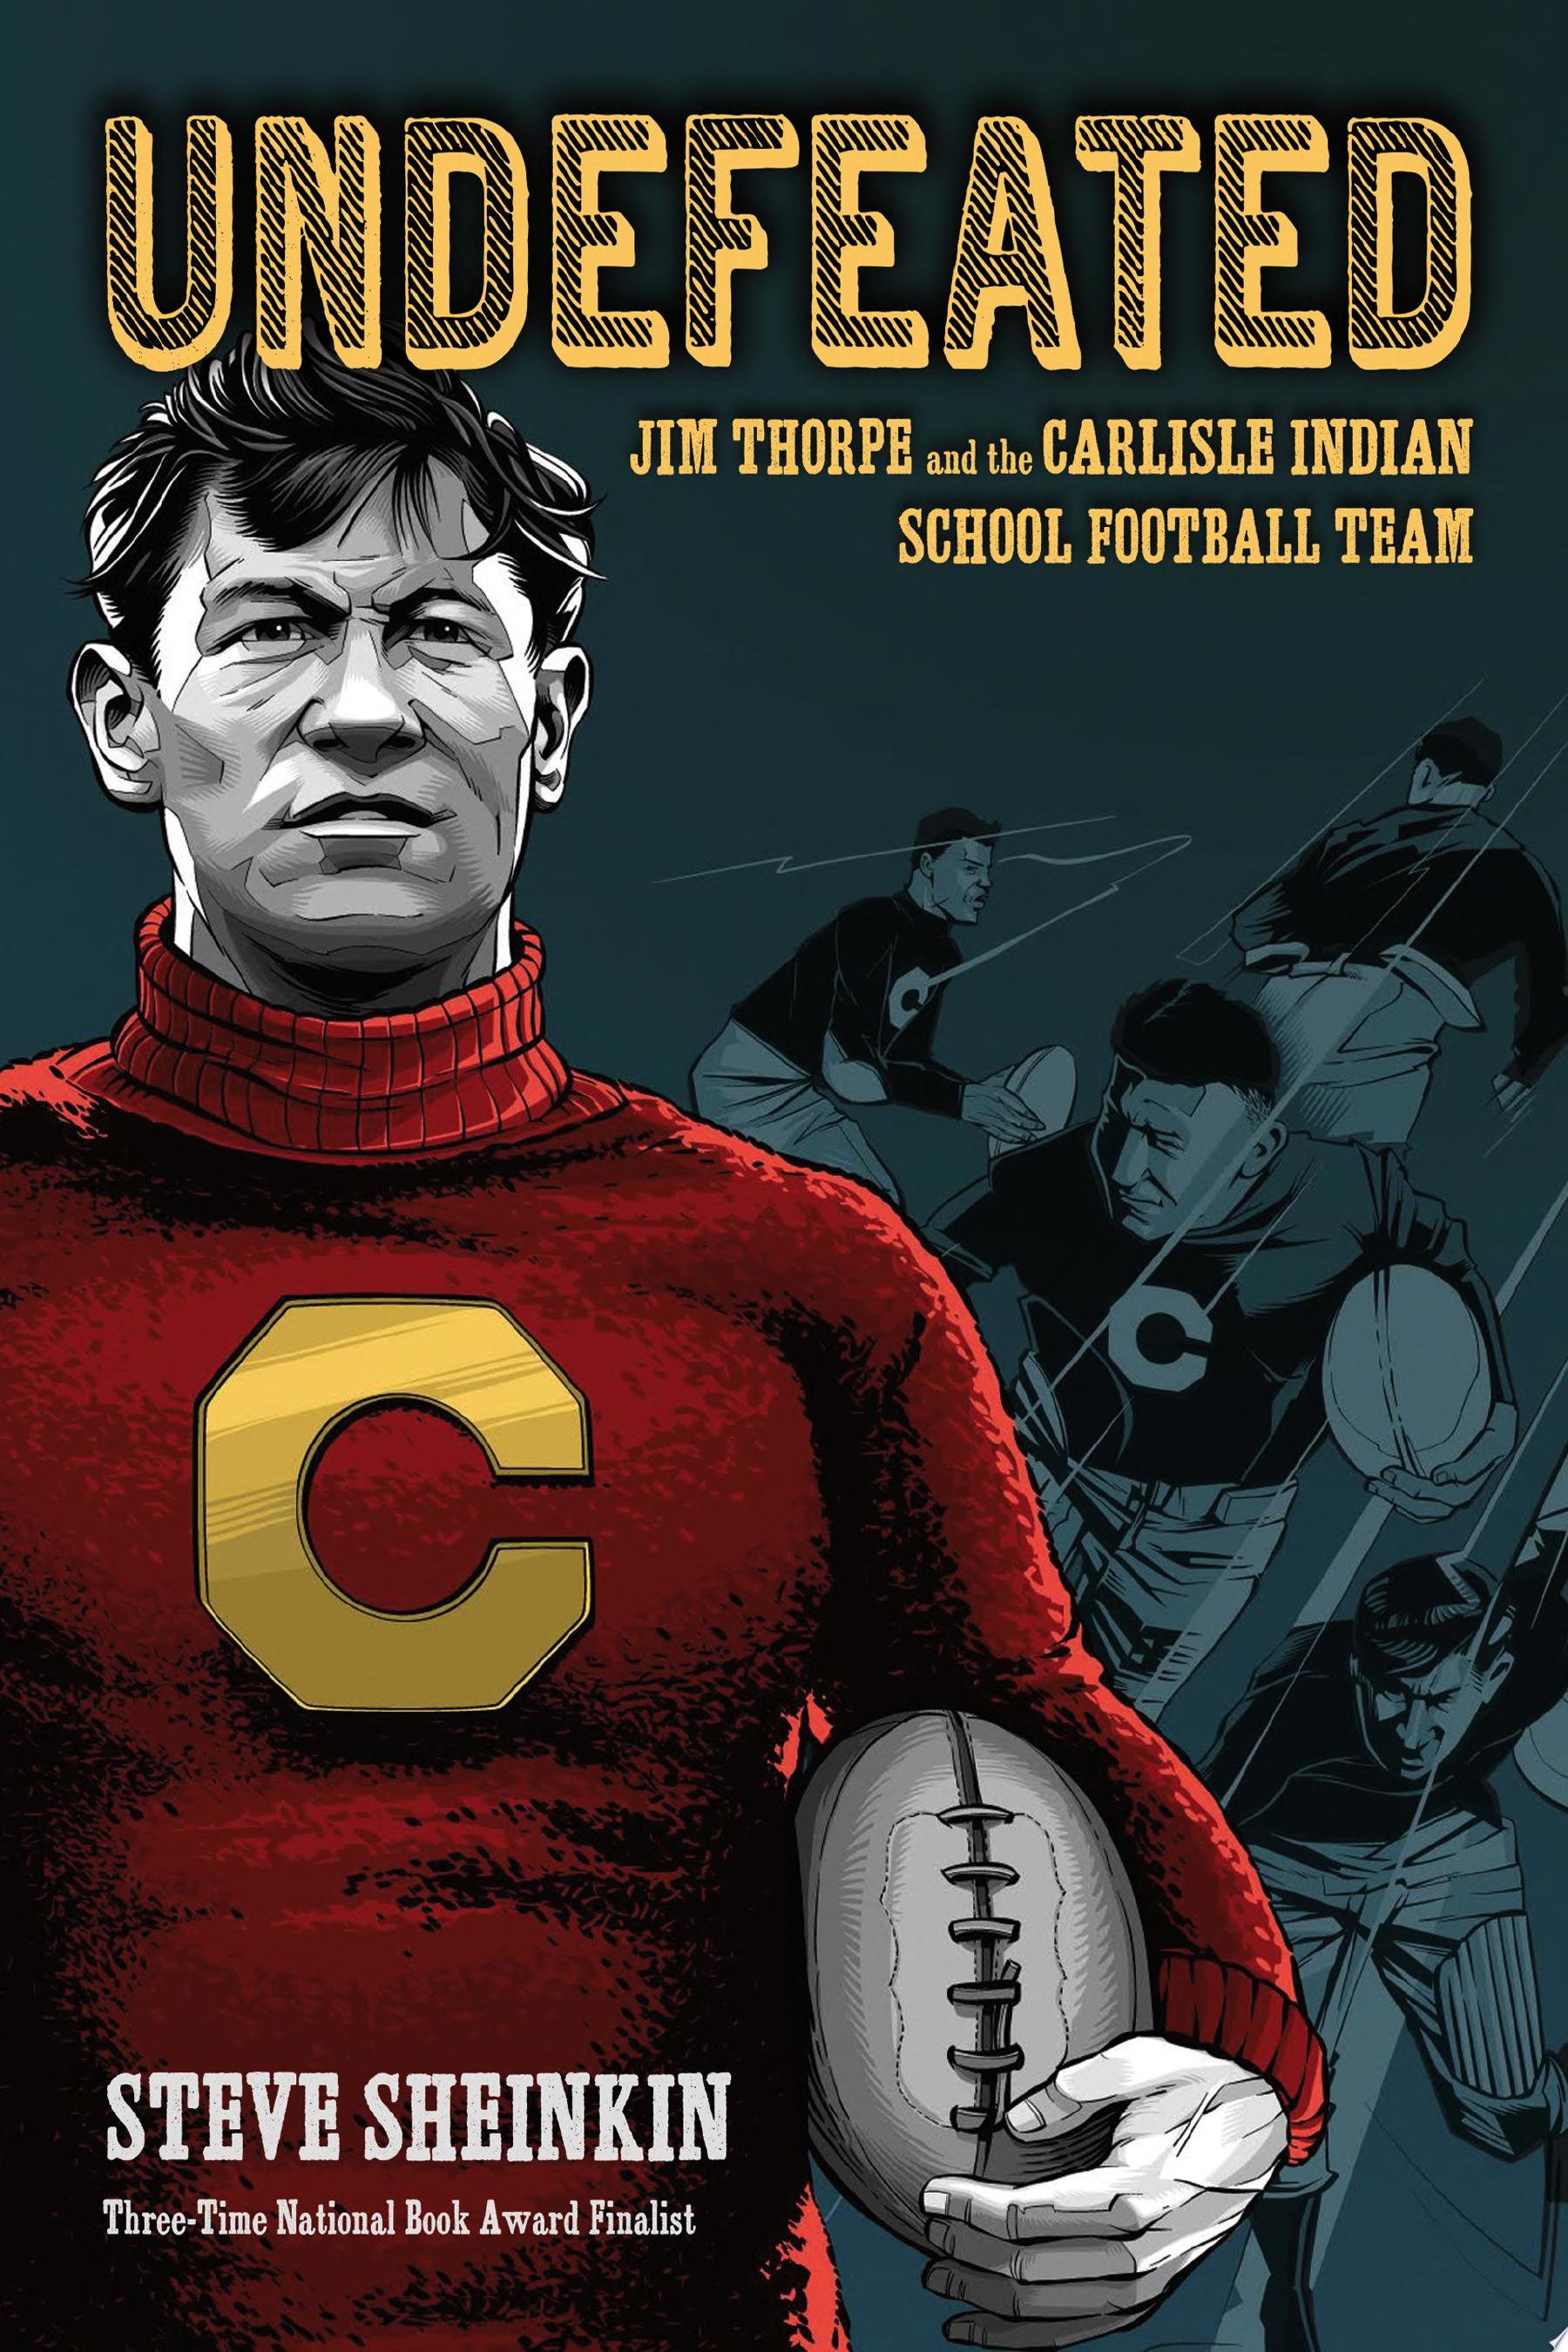 Image for "Undefeated: Jim Thorpe and the Carlisle Indian School Football Team"